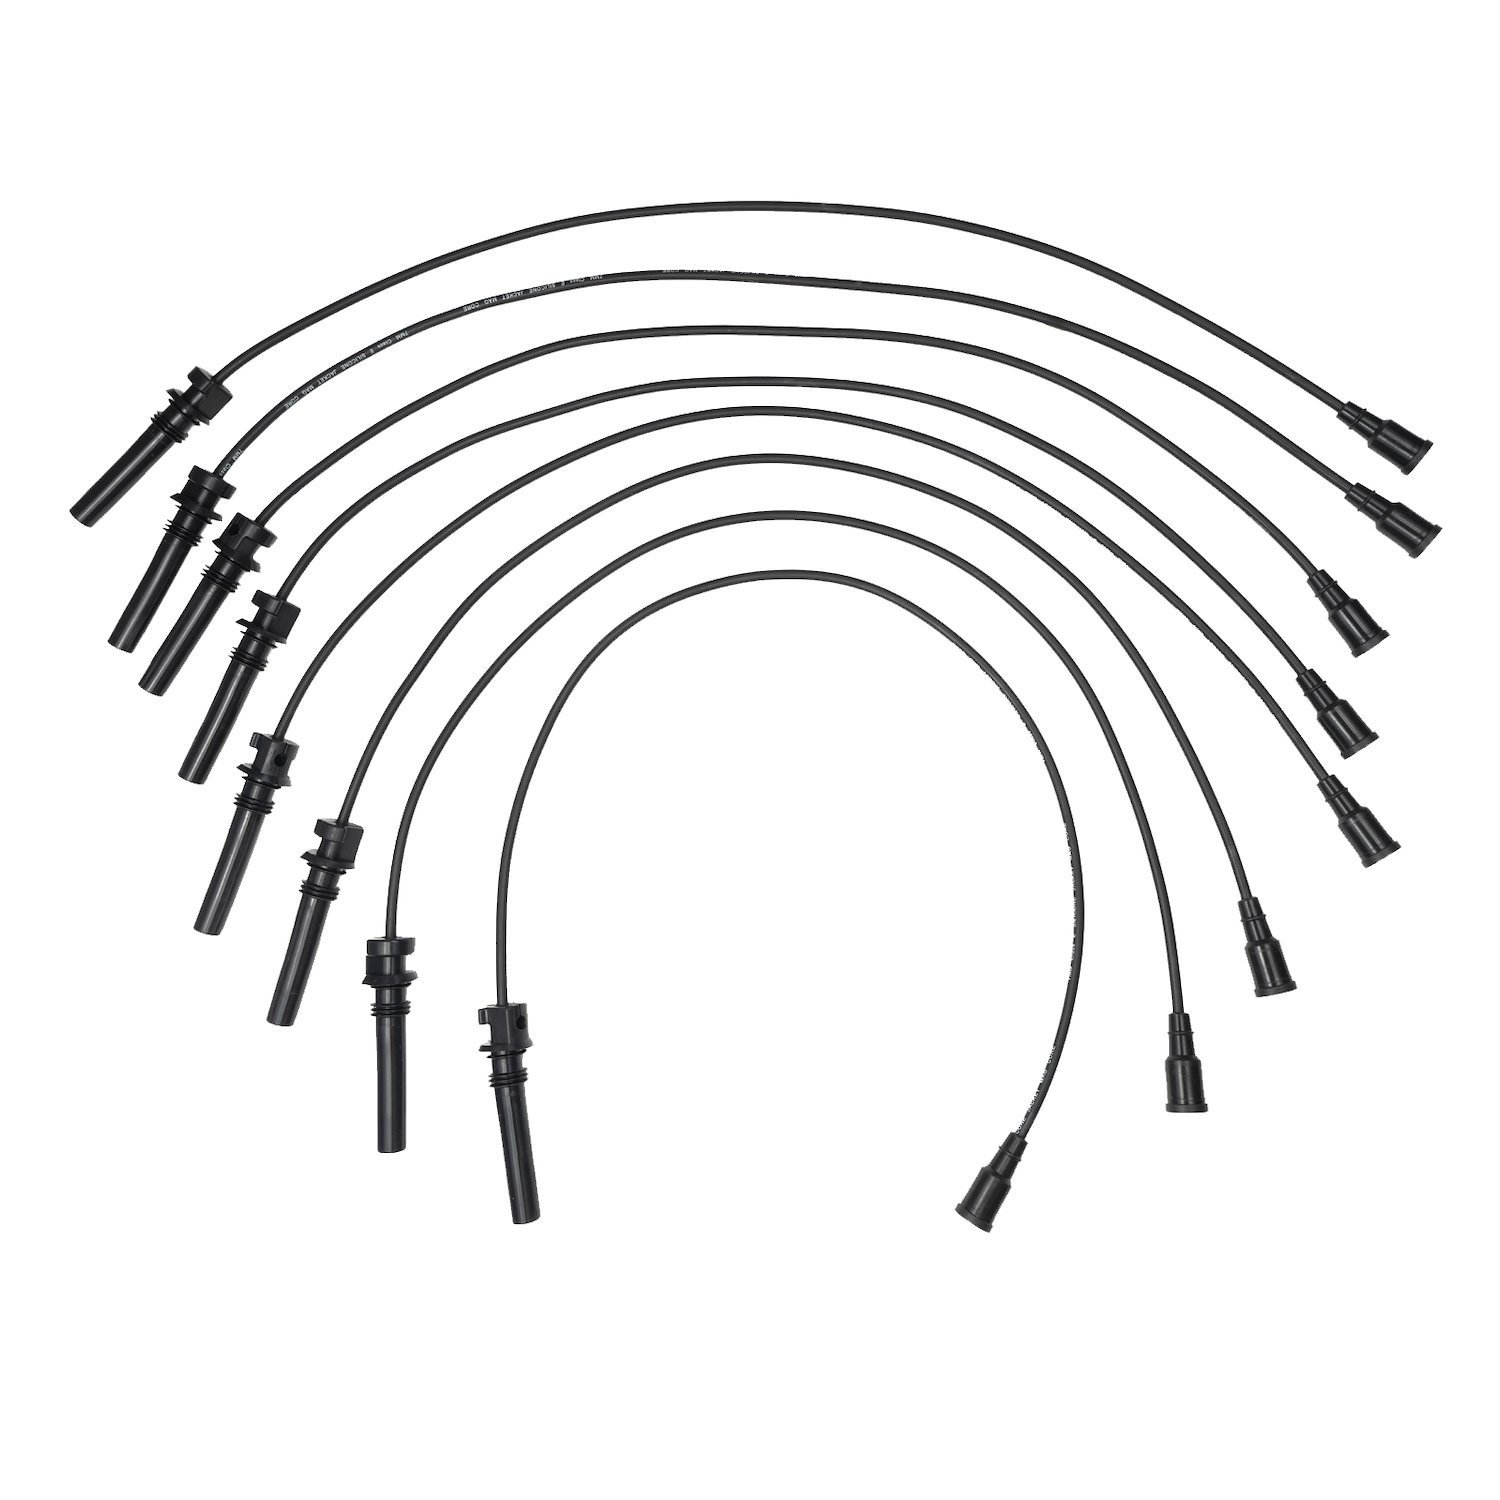 OE Replacement Spark Plug Wire Set for 2005 Jeep Grand Cherokee 5.7L, 2005 Chrysler 300 5.7/6.1L, 2005 Dodge Magnum 5.7L